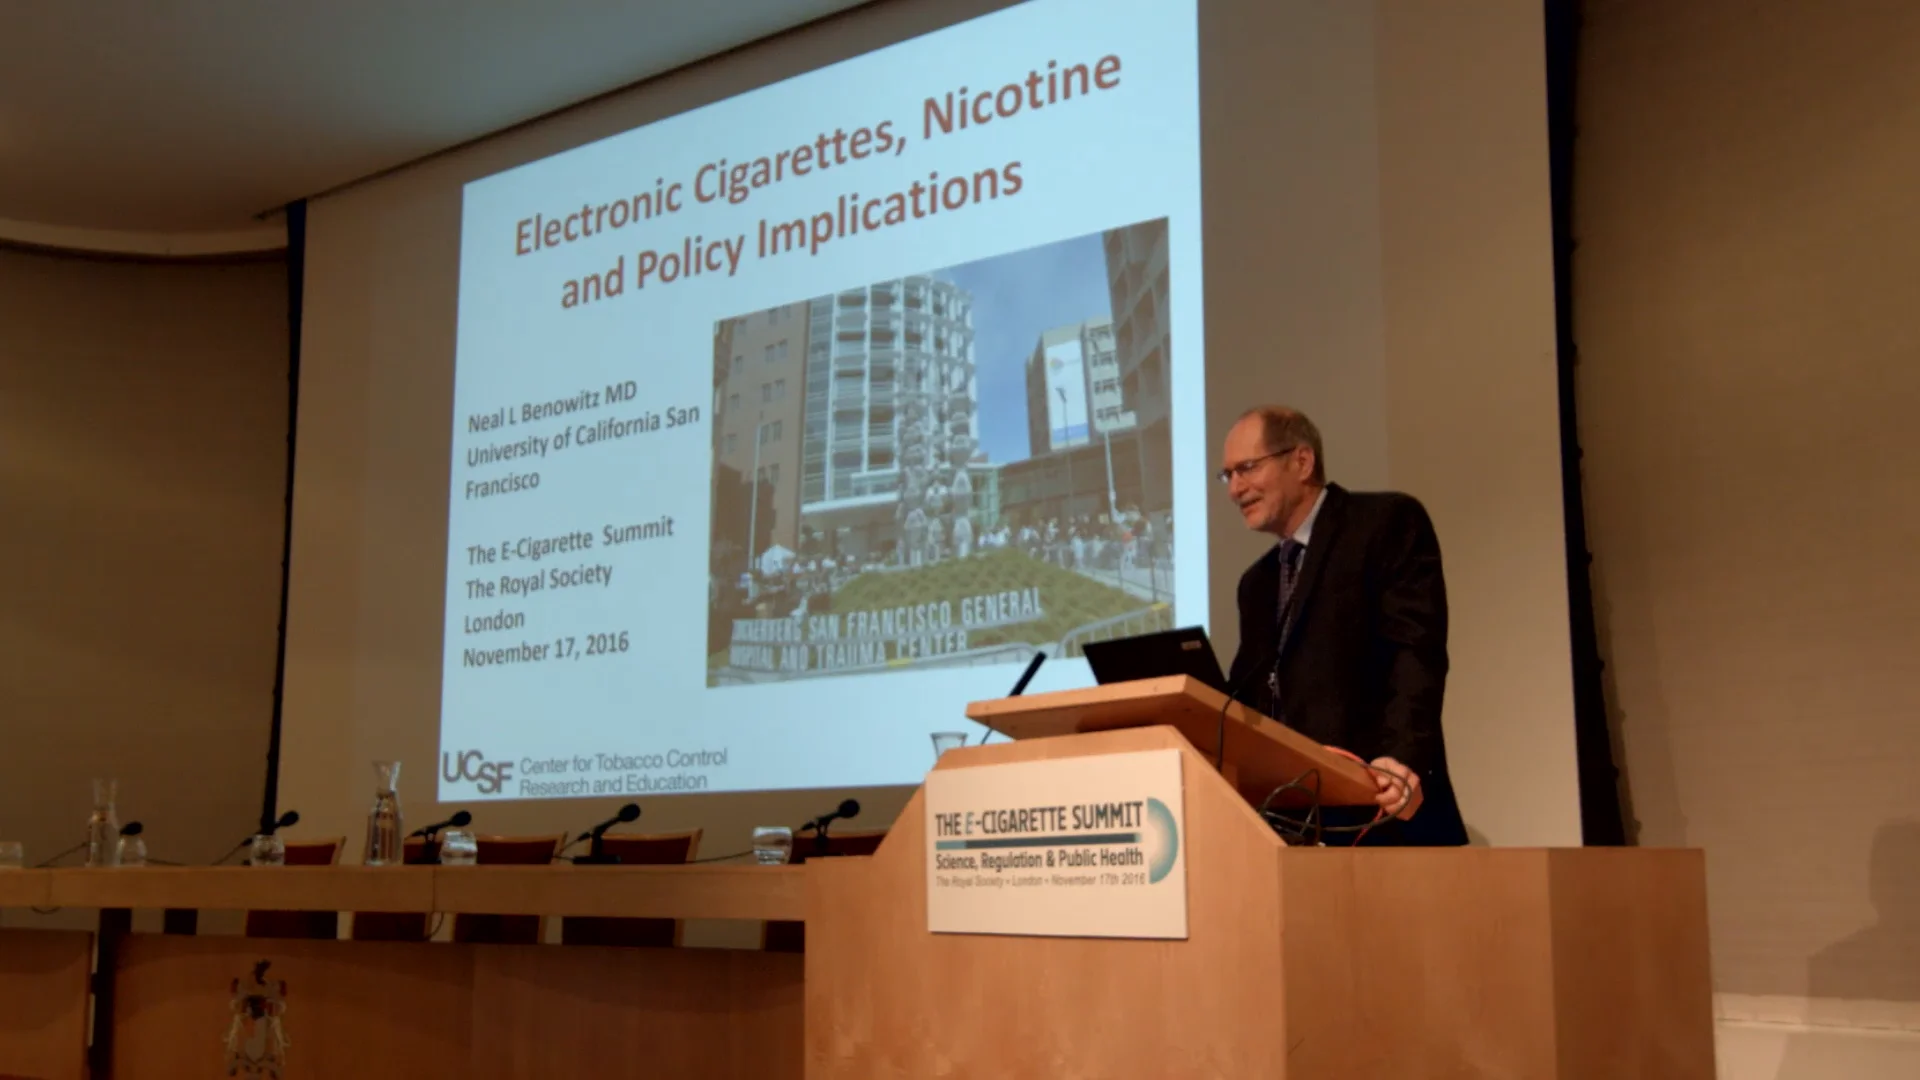 Neal Benowitz, MD  Center for Tobacco Control Research and Education